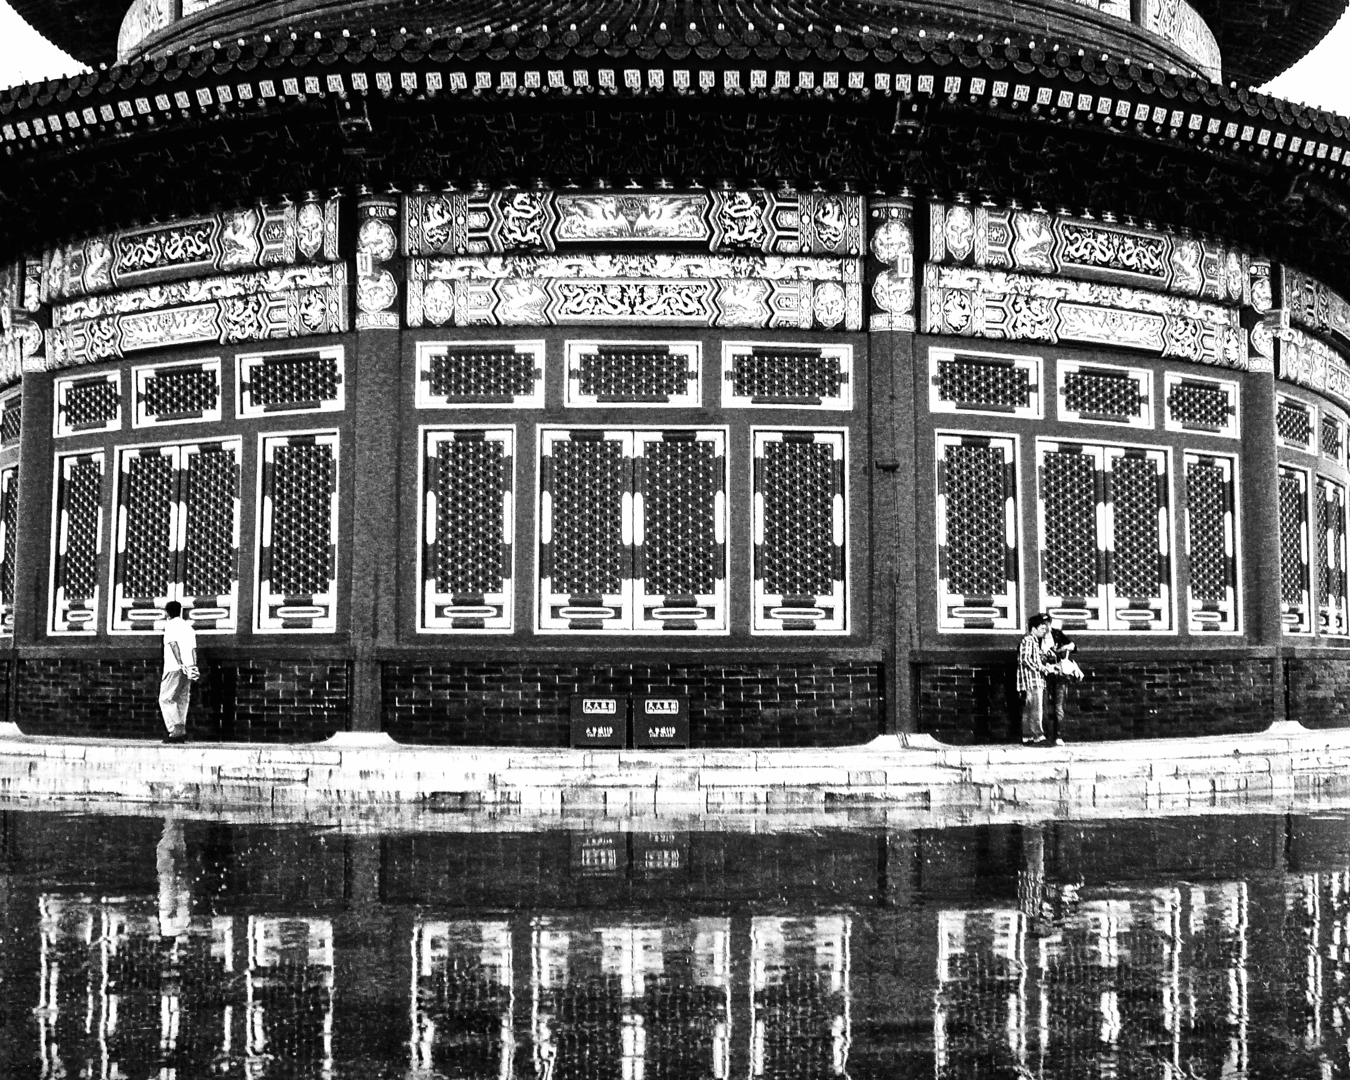 Mono Print Open B Grade Temple of Heaven Beijing Wanda Bowen August 2018   Within the Adelaide Square Mile